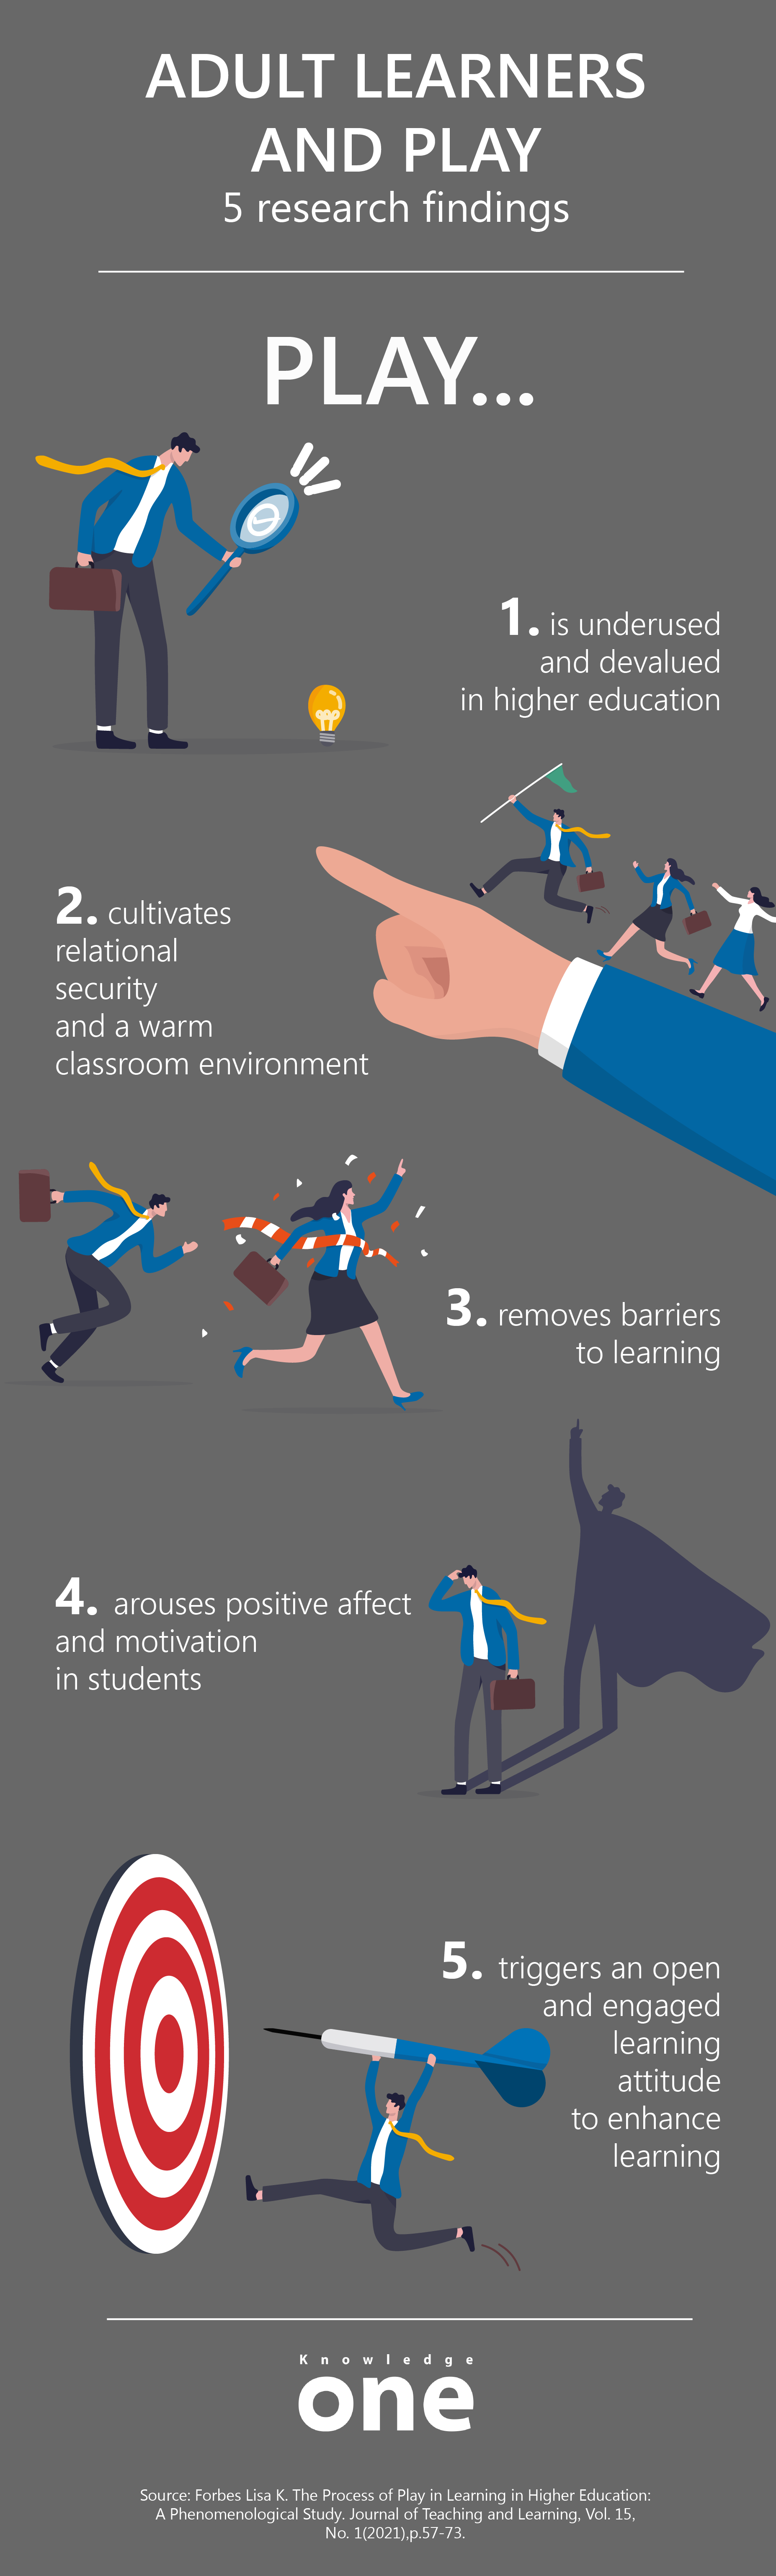 Infographic on the use of play in higher education